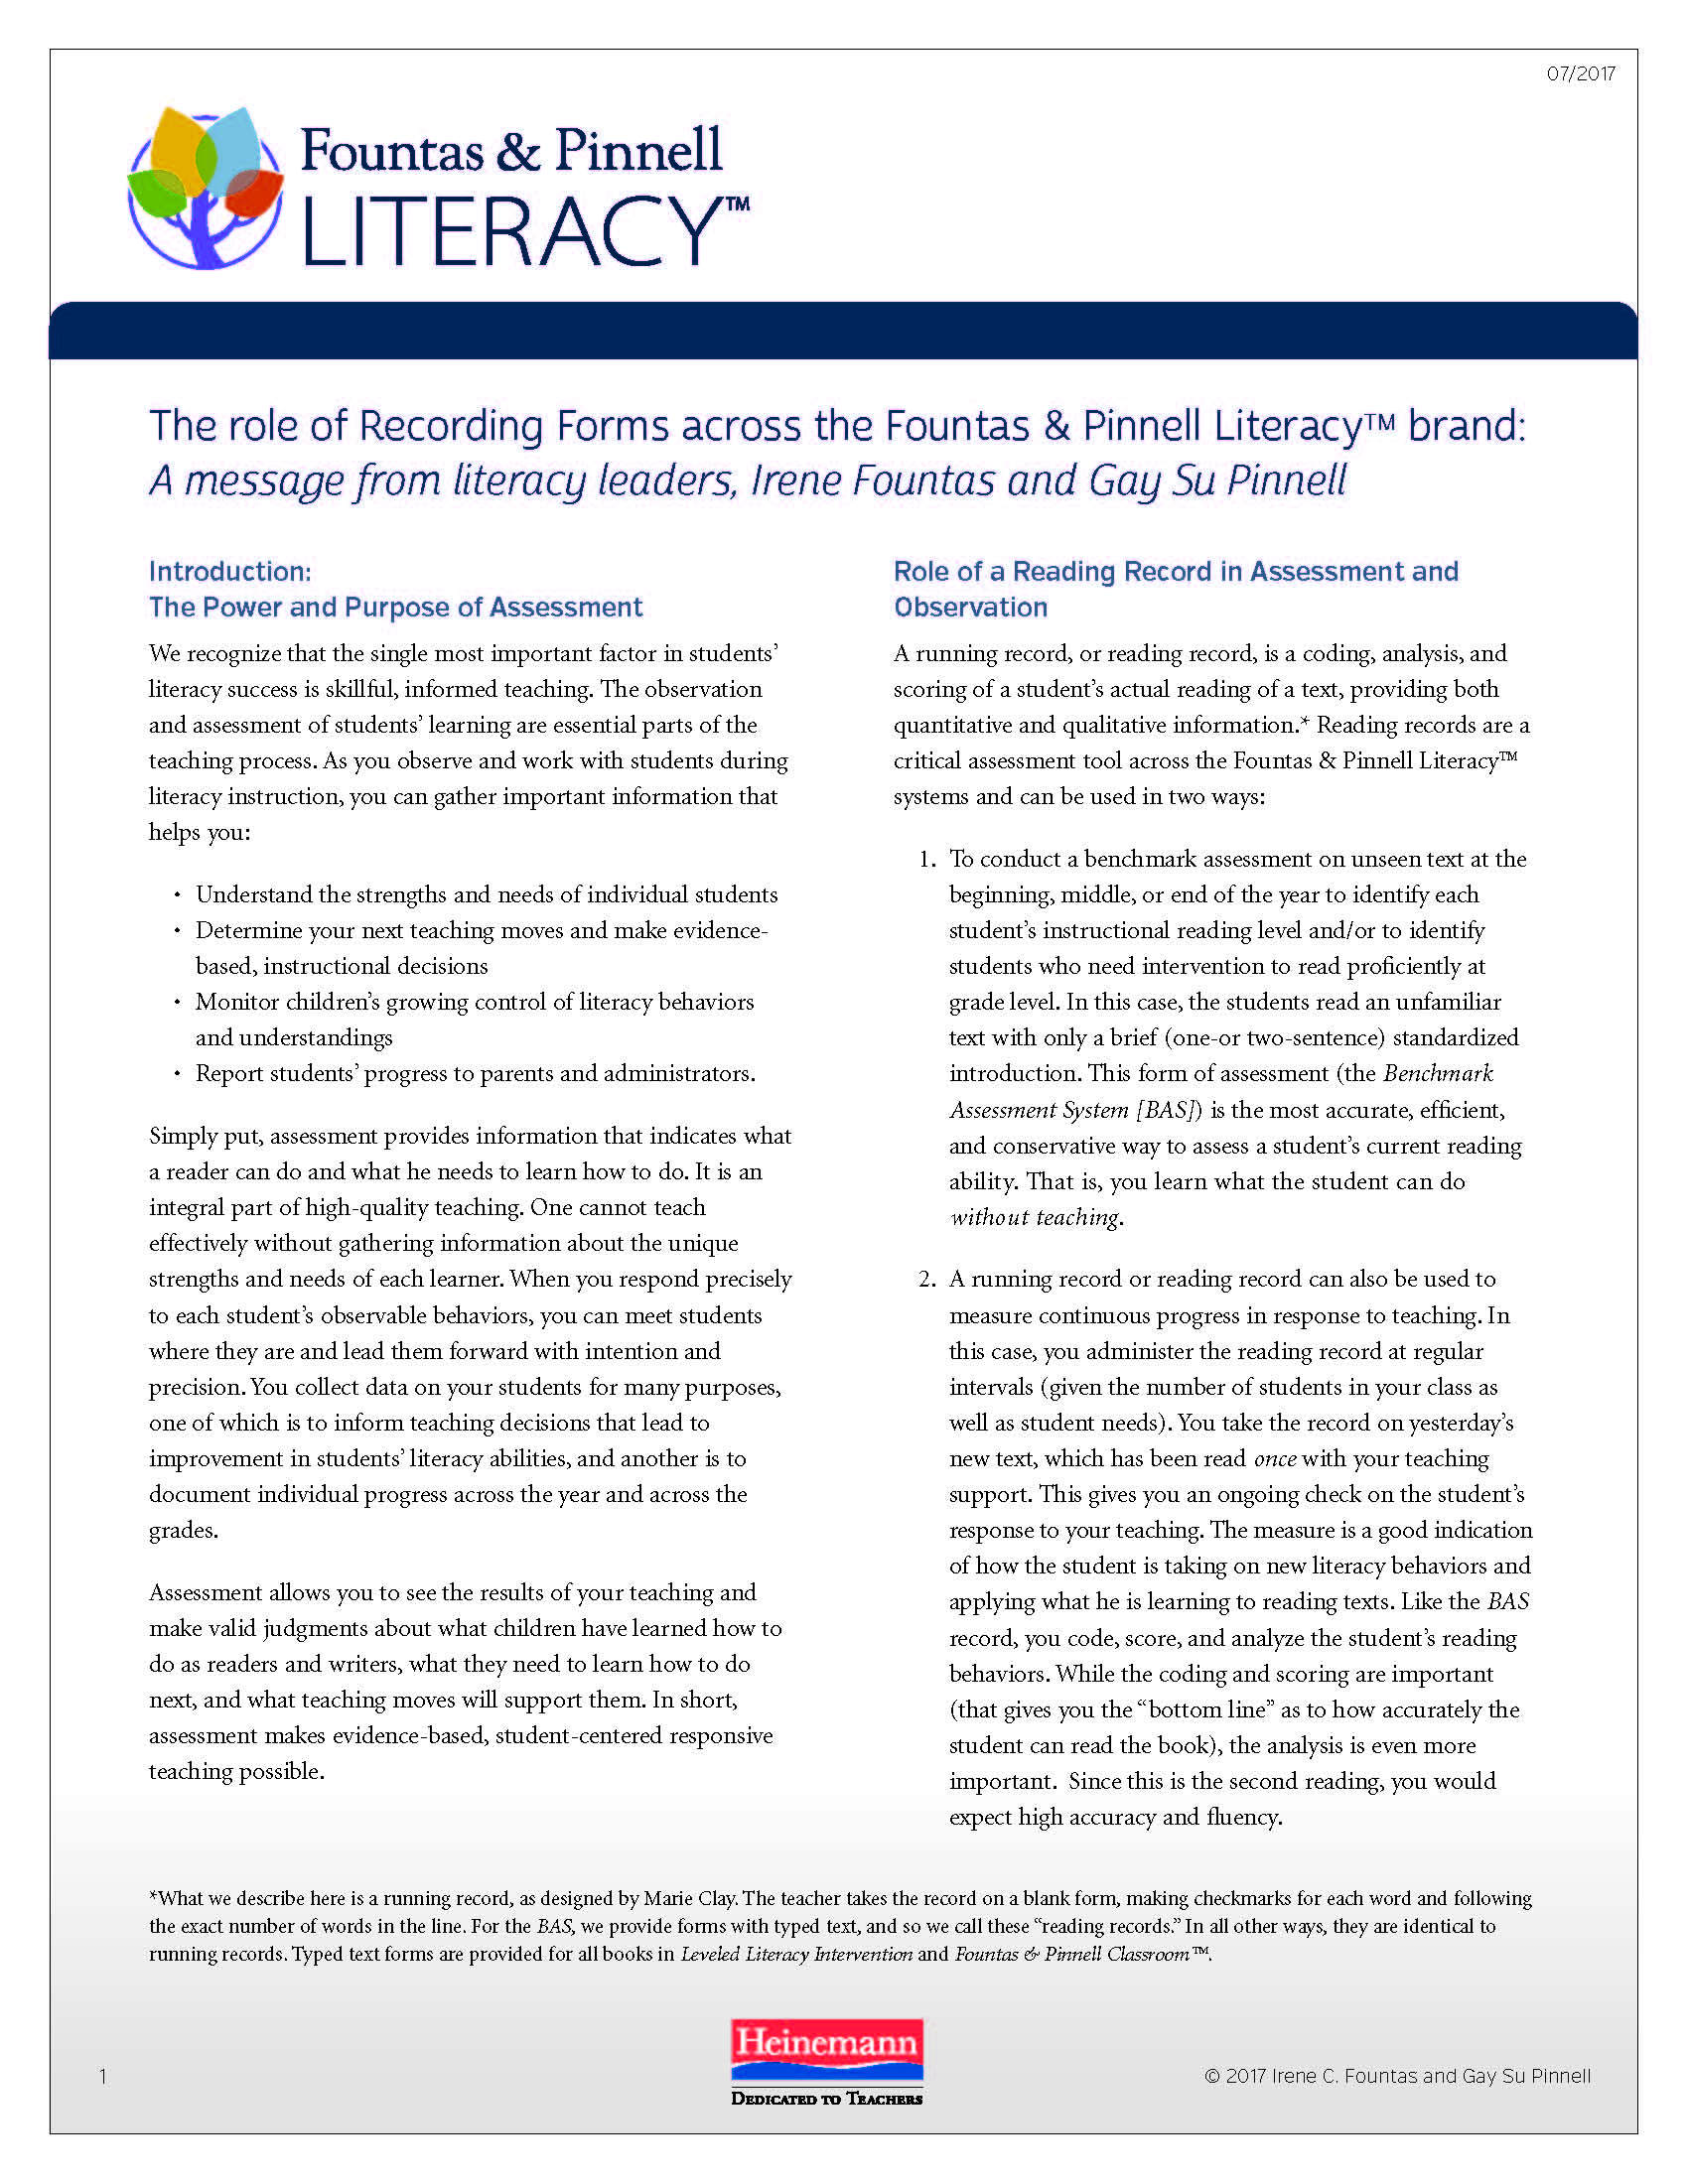 The role of Recording Forms across the Fountas & Pinnell Literacy™ brand: A message from literacy leaders, Irene Fountas and Gay Su Pinnell